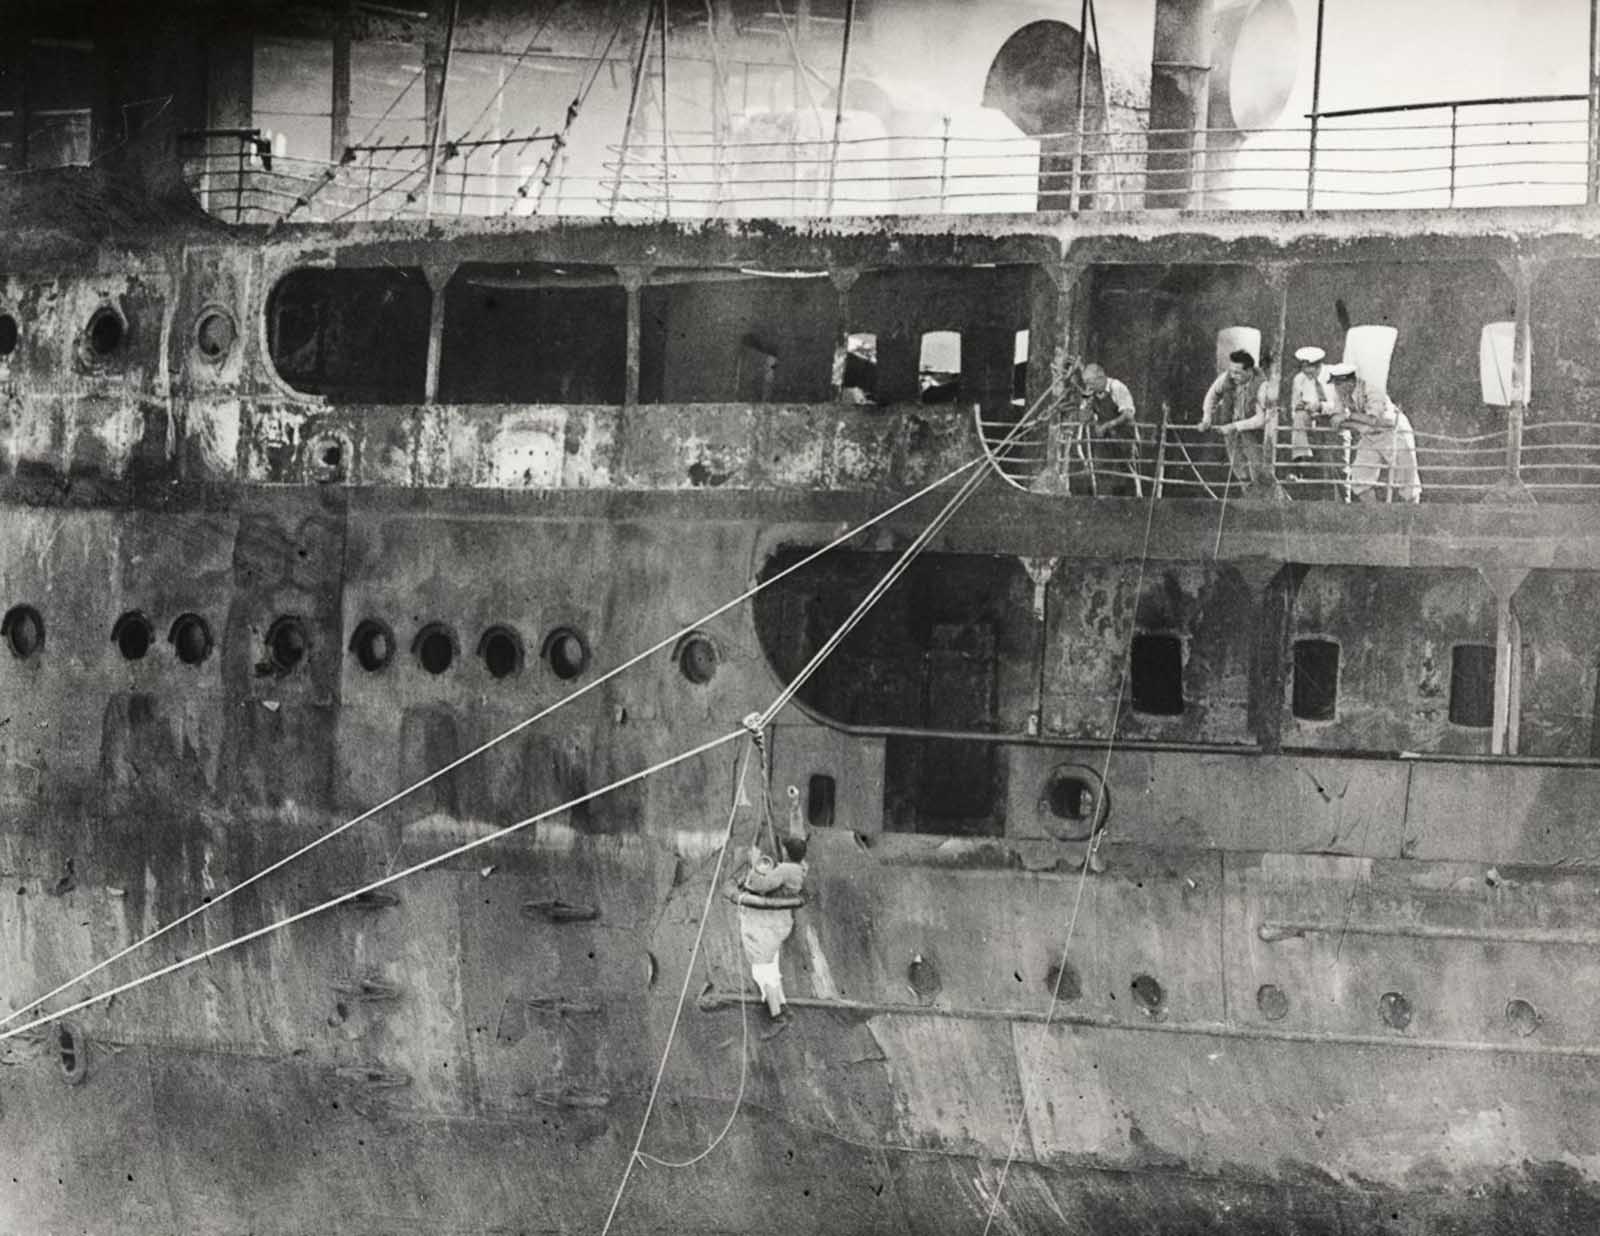 Men climb aboard the wreck to search for bodies.